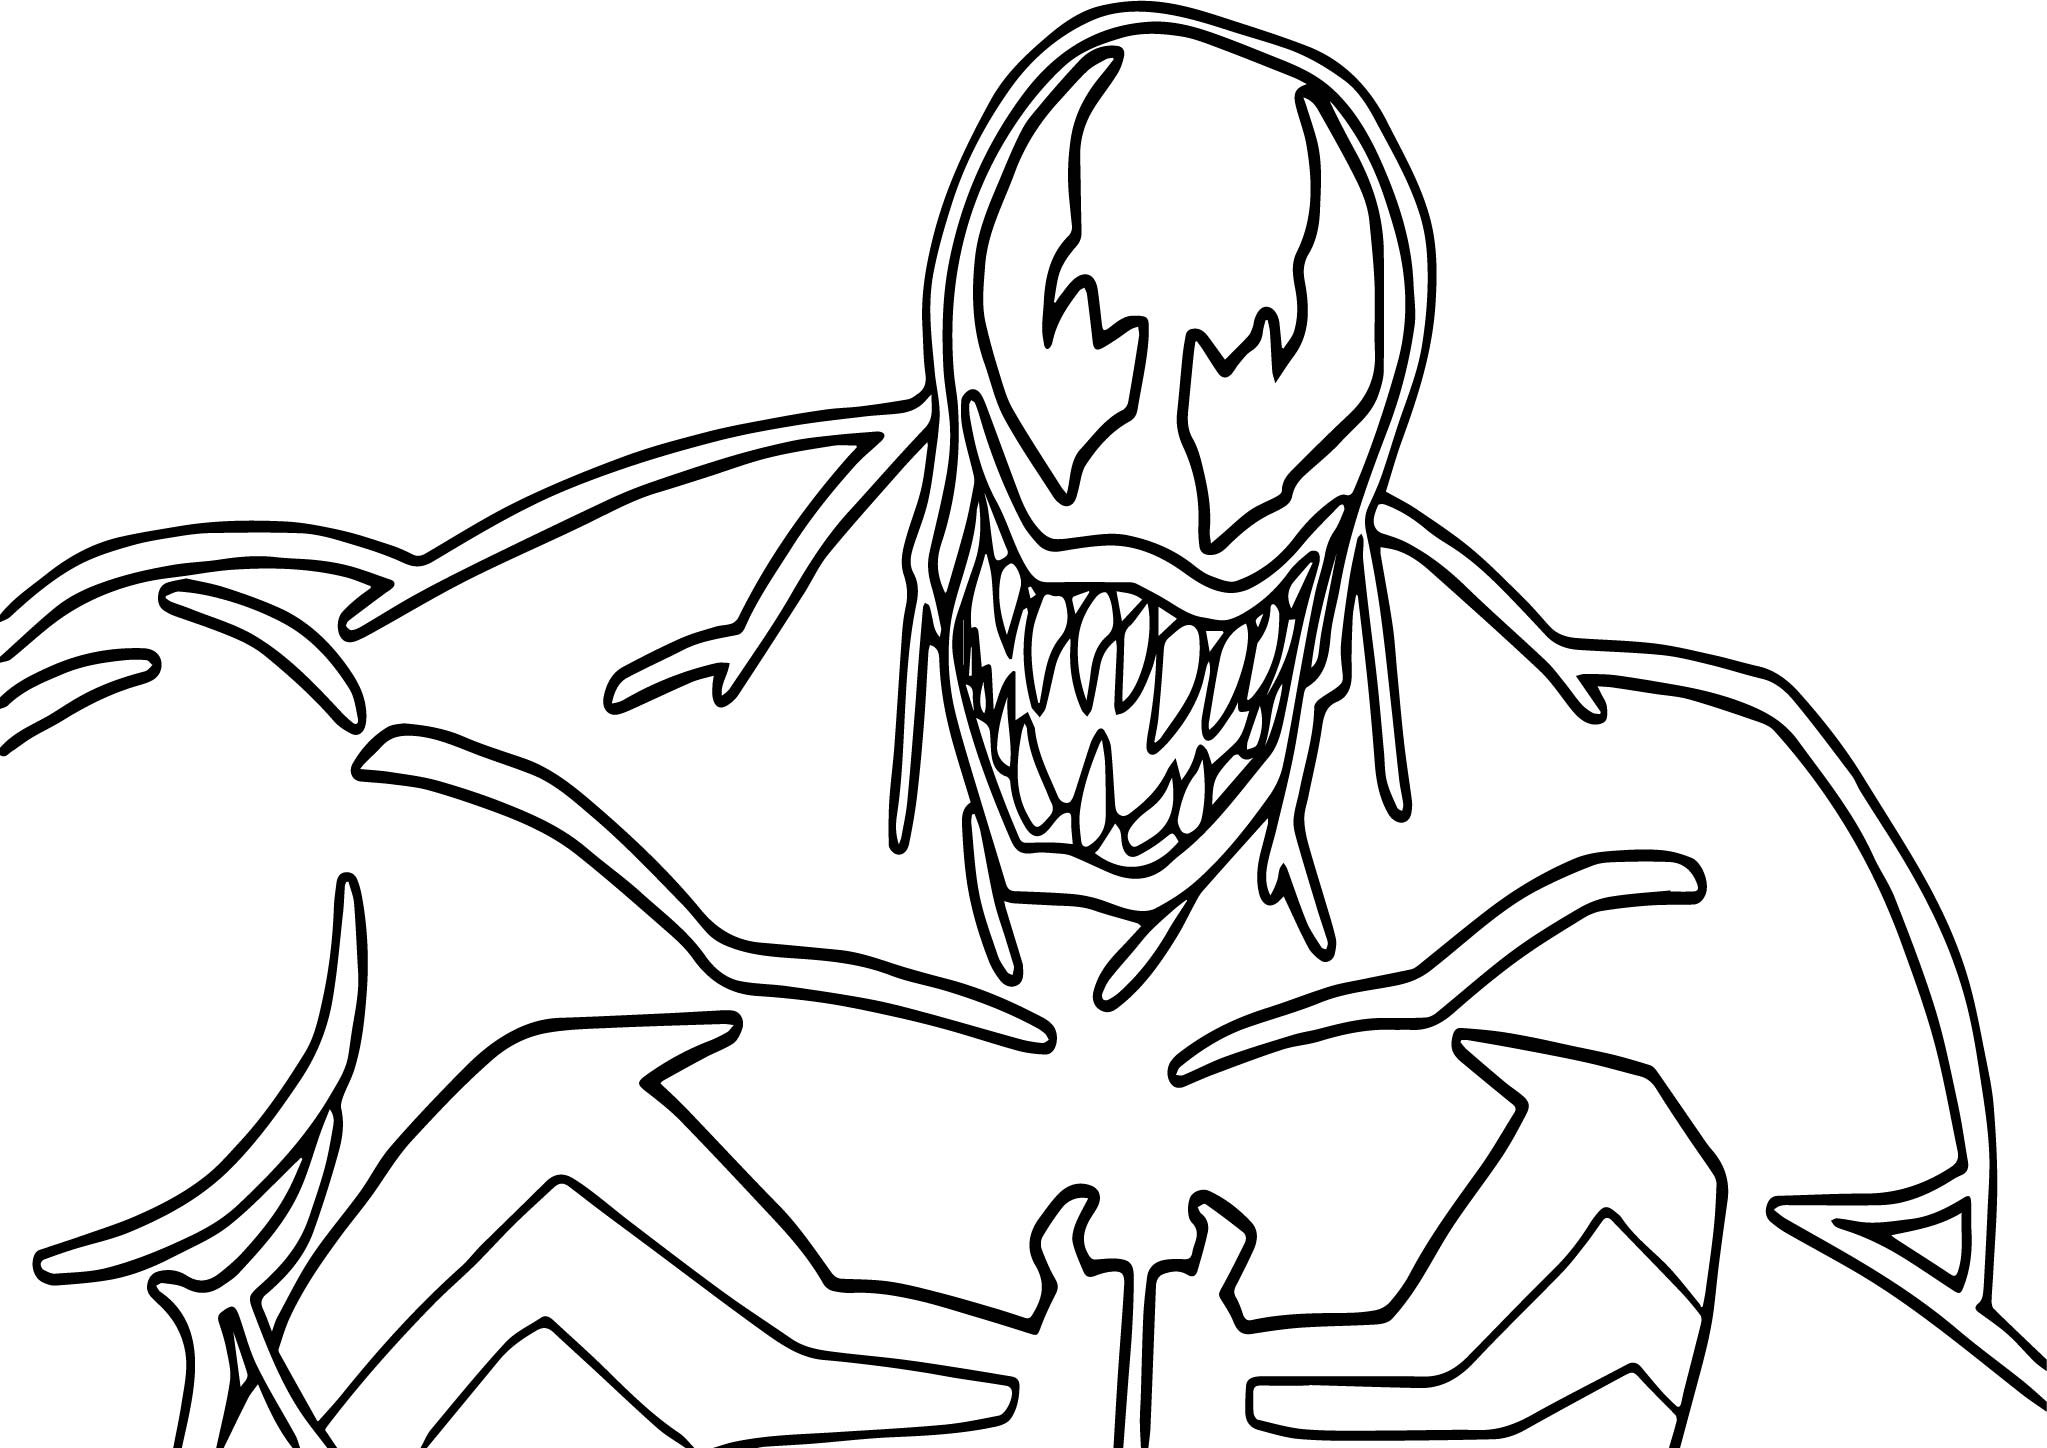 Spiderman Venom Coloring Pages at GetColorings.com   Free printable ...